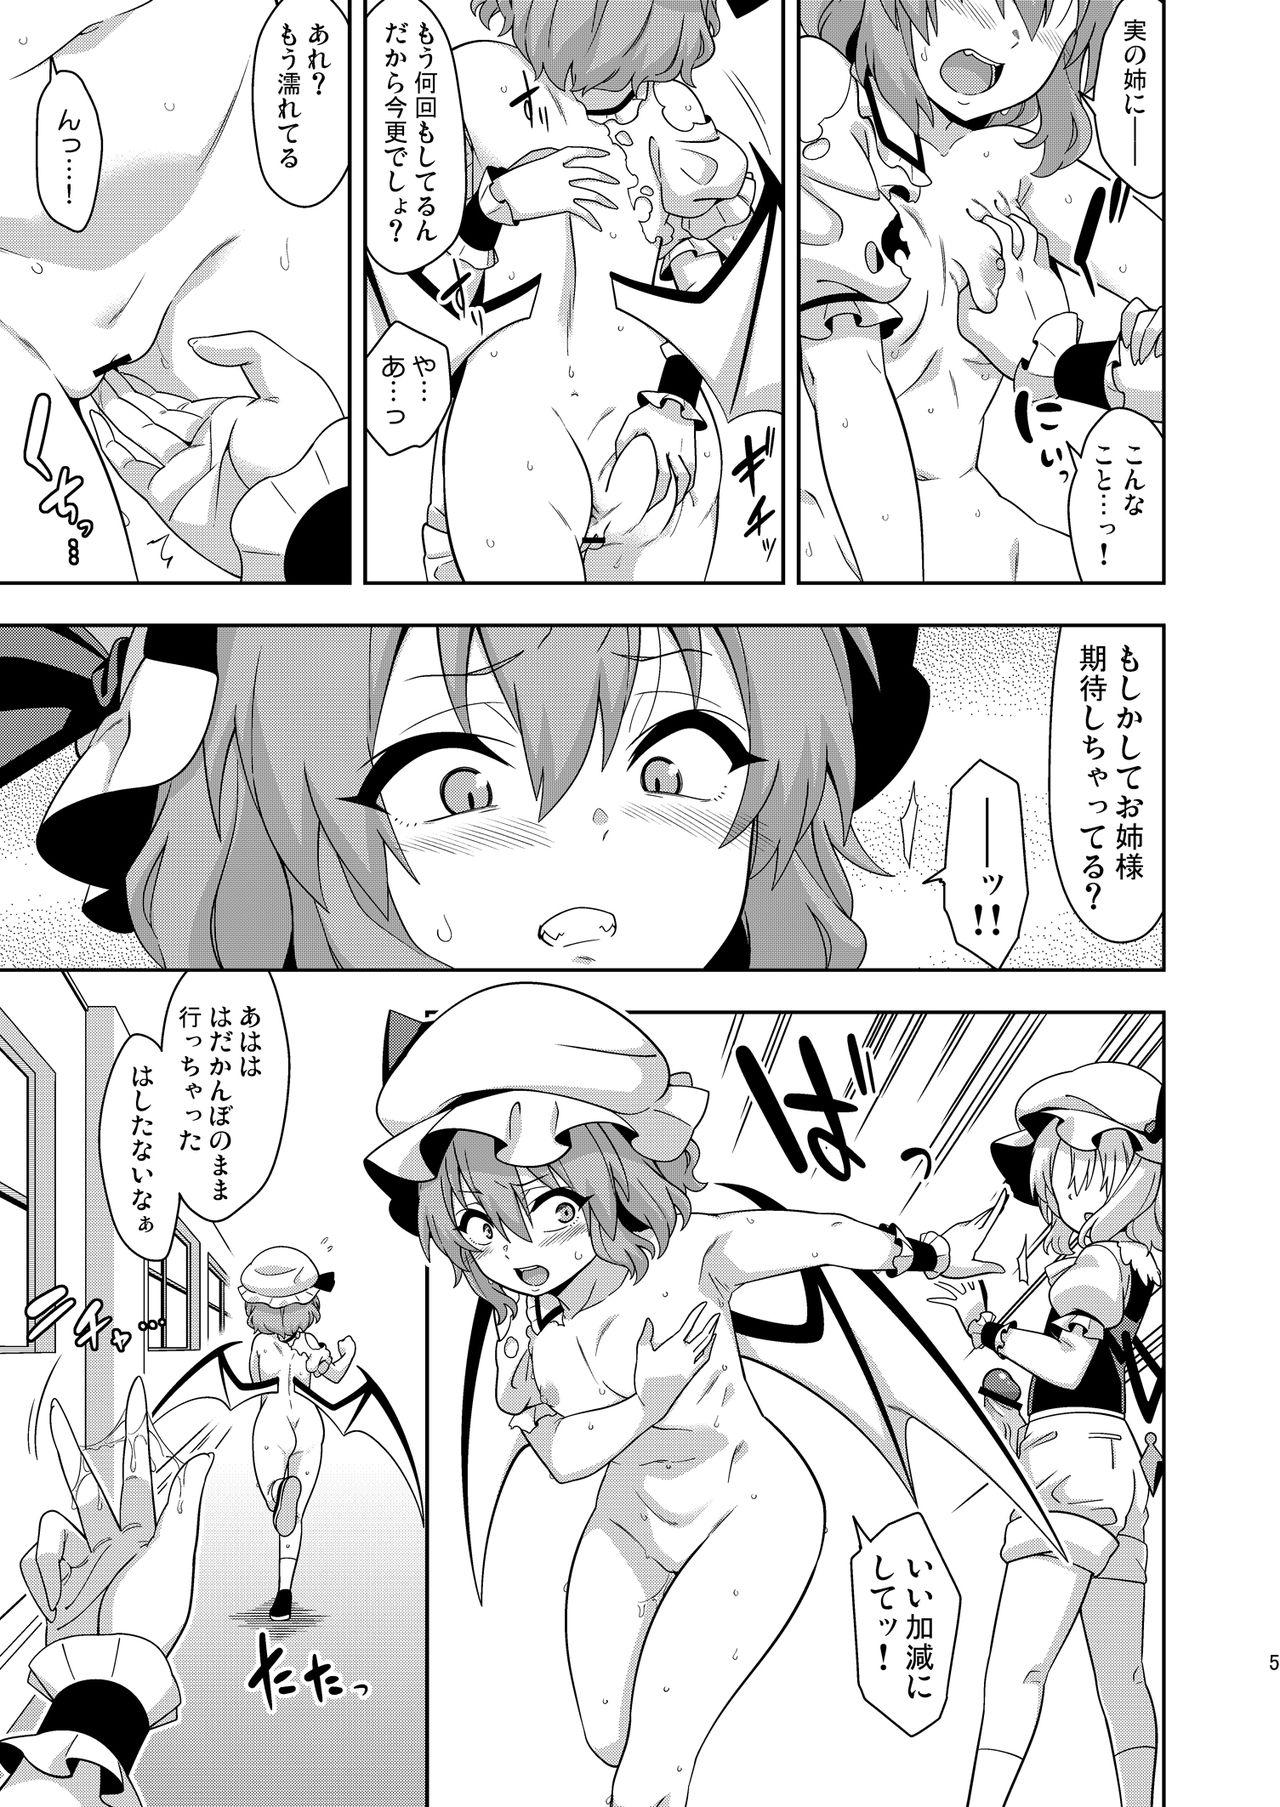 Girl Girl VAMPIRE SACRIFICE - Touhou project Mommy - Page 4